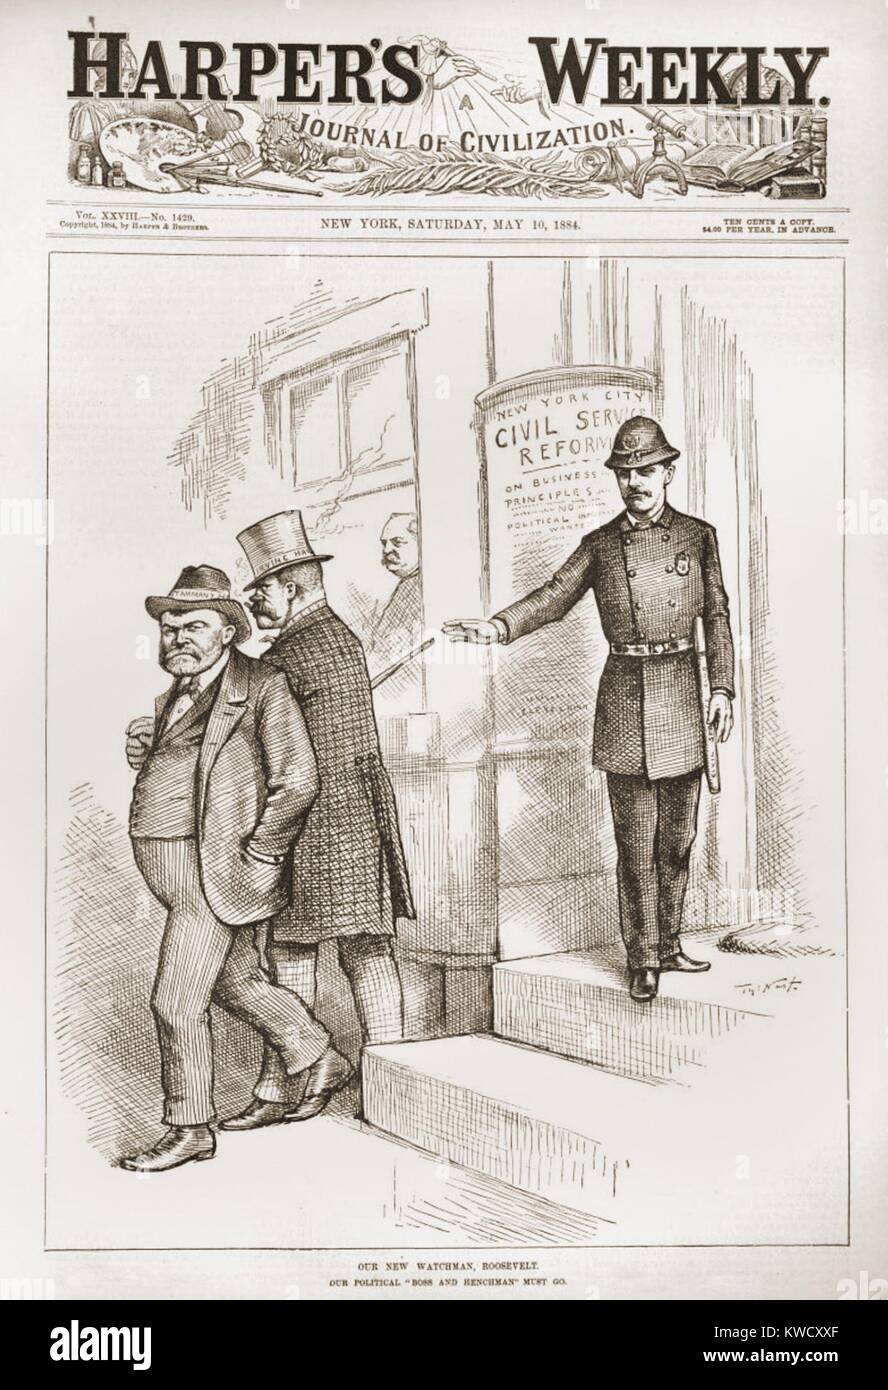 OUR NEW WATCHMAN, ROOSEVELT. OUR POLITICAL BOSSES AND HENCHMEN MUST GO. Standing in front of a poster of the New York City Civil Service Reform law, Assemblyman Theodore Roosevelt in a policemans uniform, evicts two men with hats labeled, Tammany Hall (resembles John Kelly) and Irvine Hall. Gov. Grover Cleveland looks on through a window. Thomas Nast illustration on cover of Harpers Weekly, May, 19, 1884 (BSLOC 2017 4 5) Stock Photo